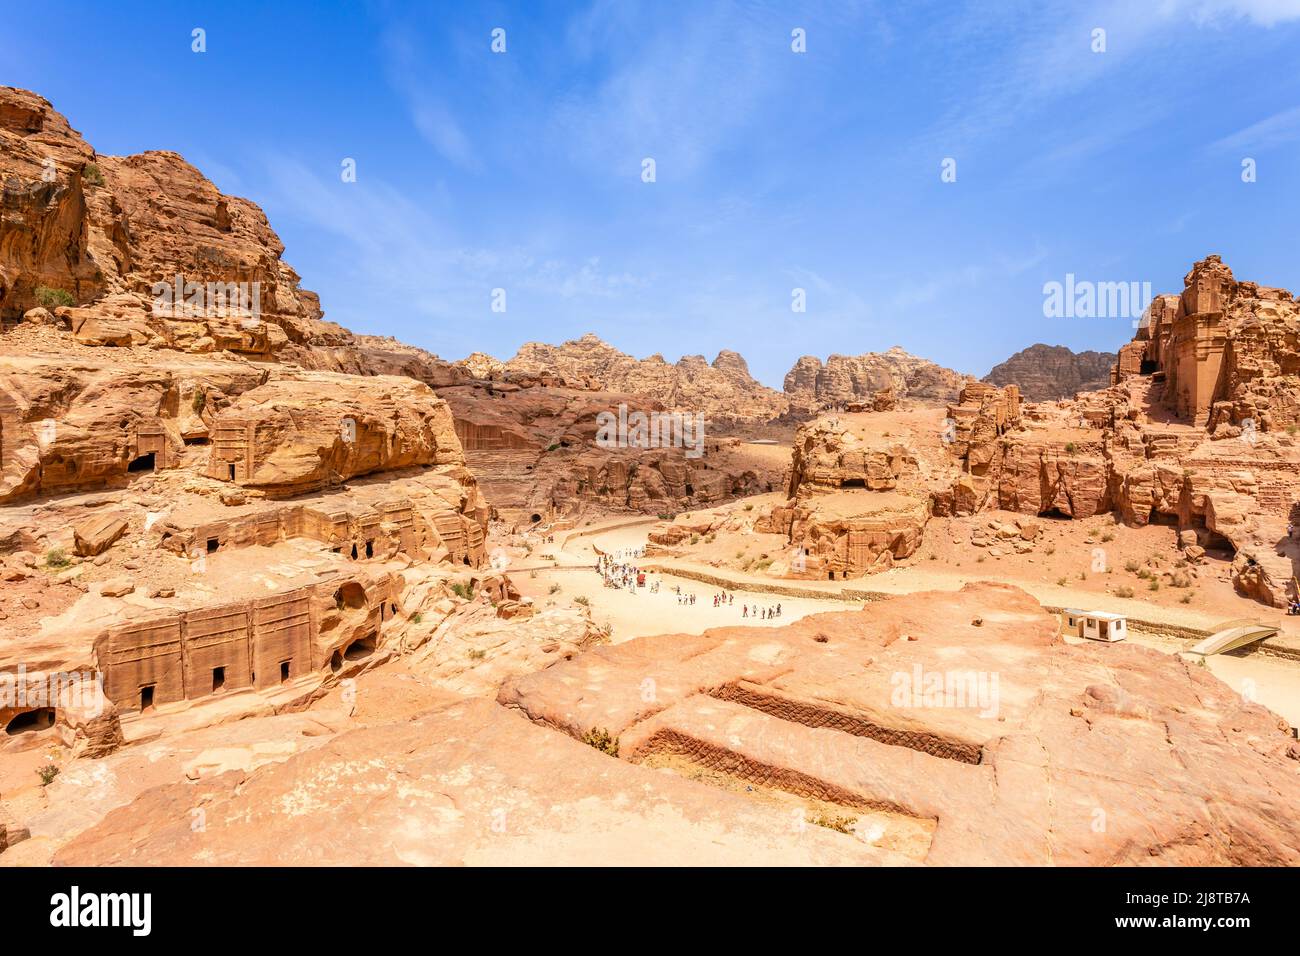 View to the ancient Nabataean Royal tombs and main street of Petra full of tourist, Jordan Stock Photo